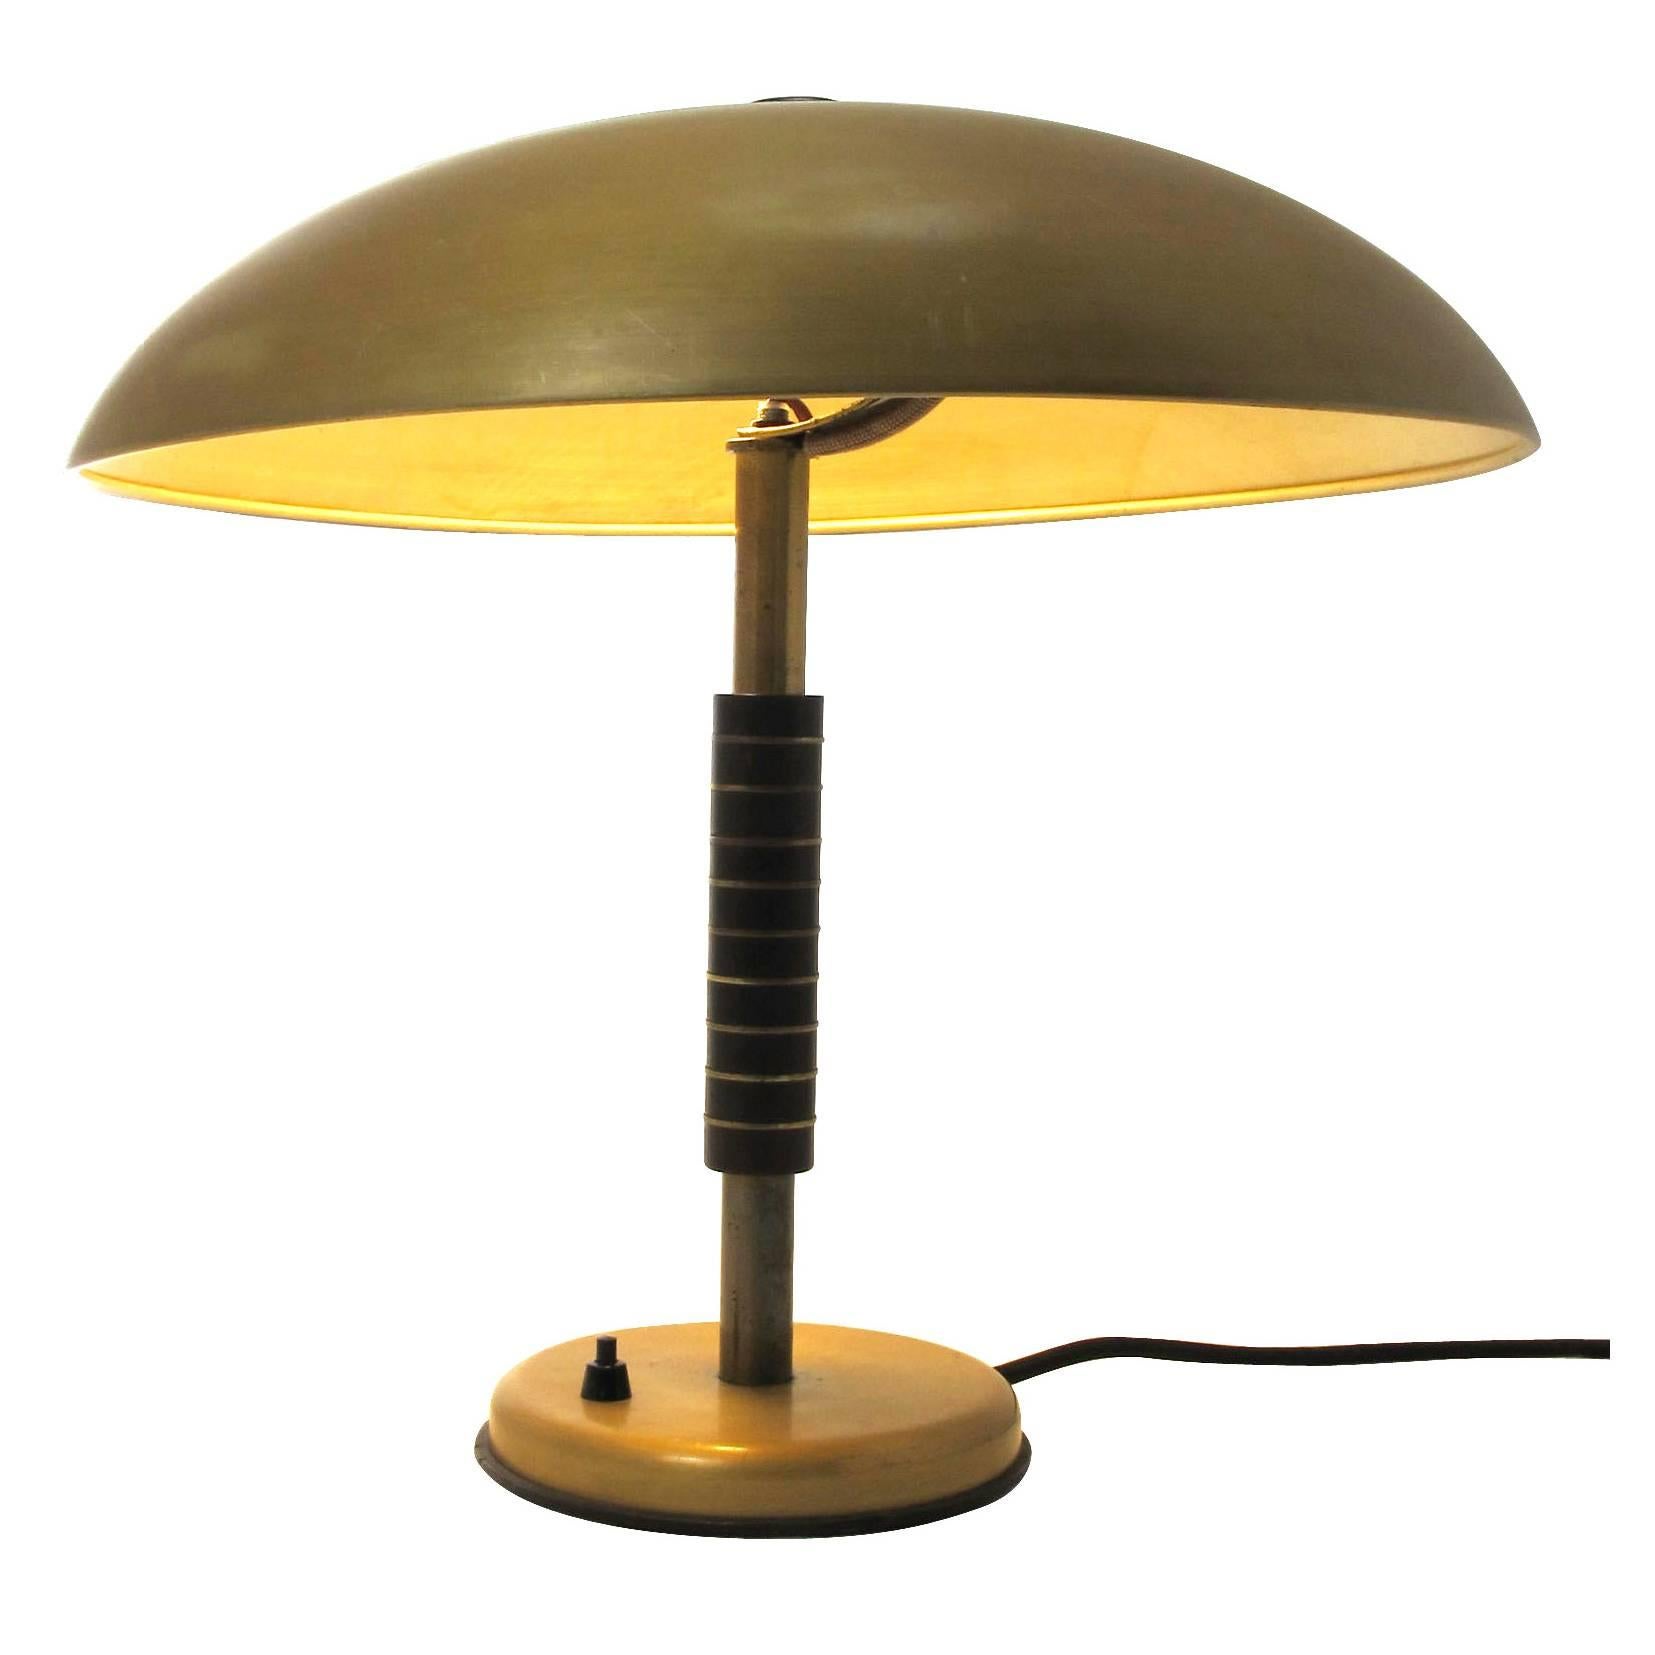  German Art Deco Table Lamp by SbF, 1944 For Sale